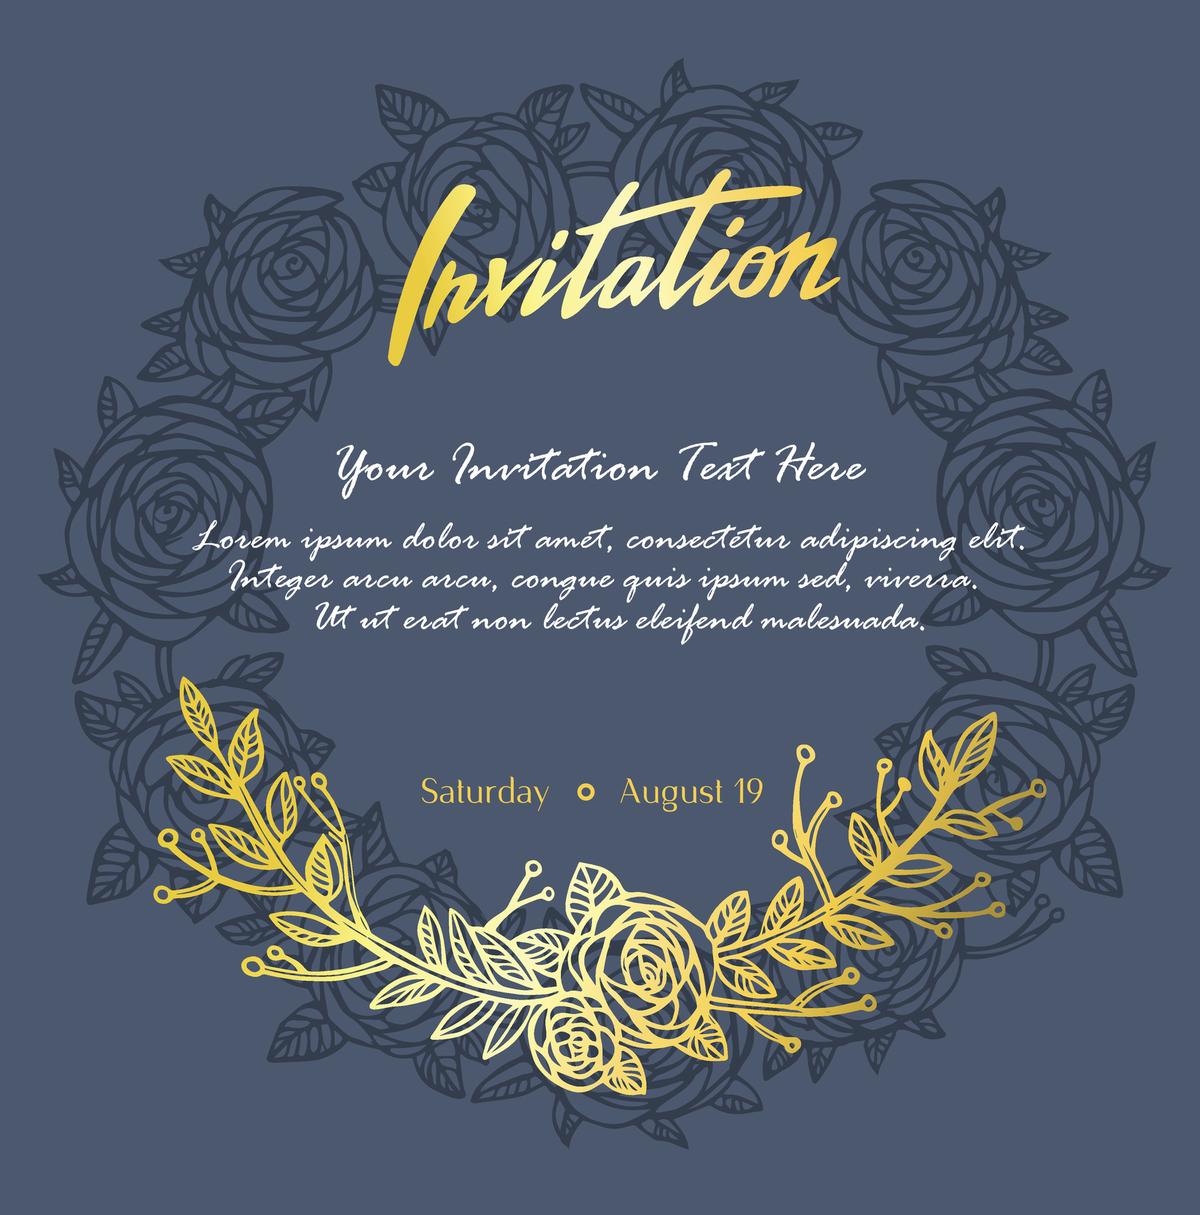 Retirement Party Invitation Wordings To Make The Guest Feel Valued